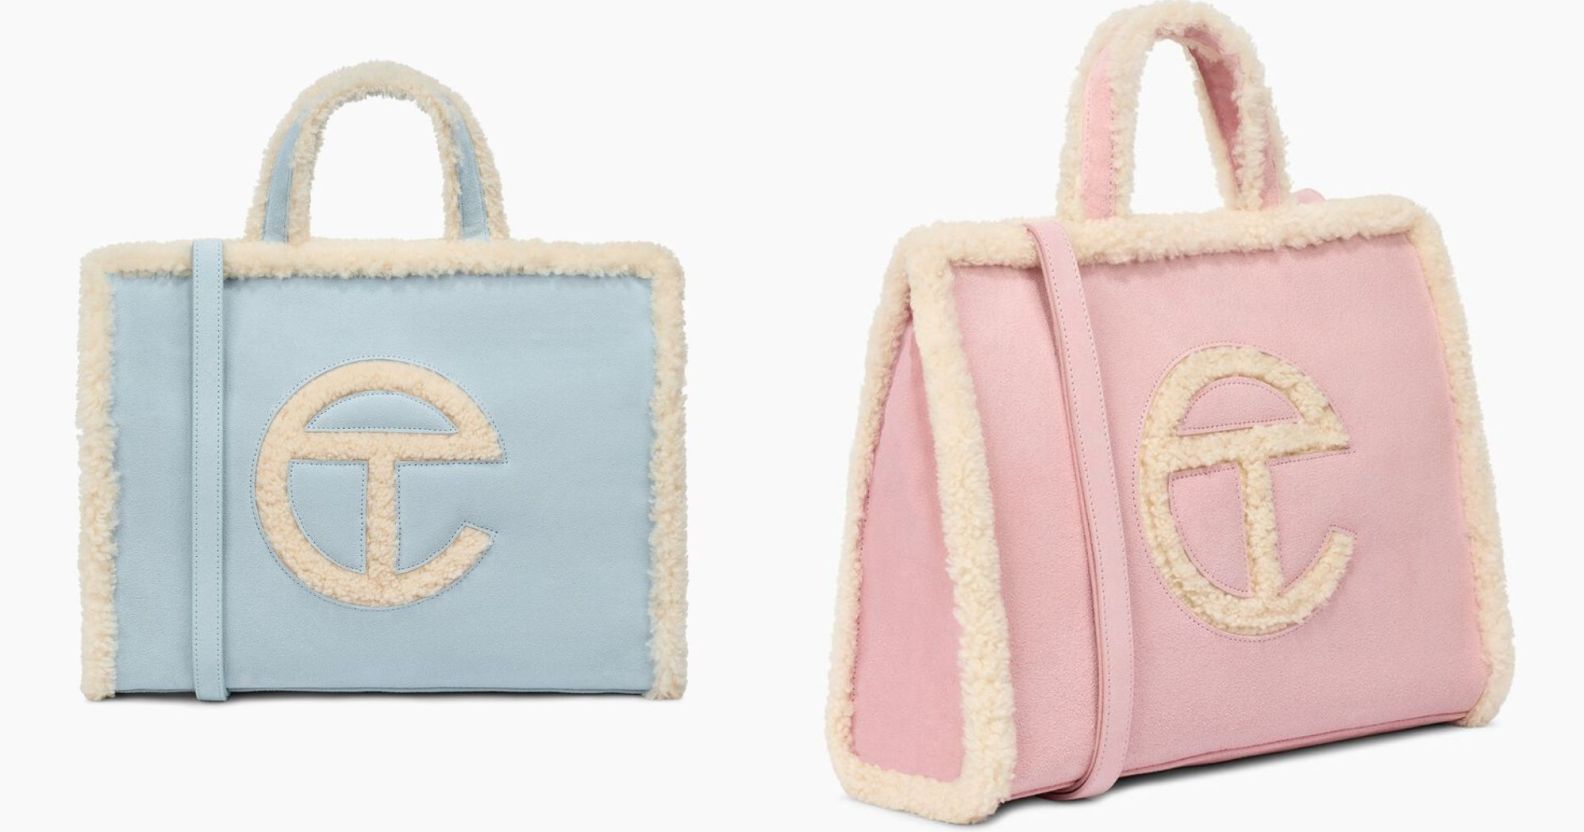 Ugg and Telfar have dropped their latest collection featuring pastel shoppers.